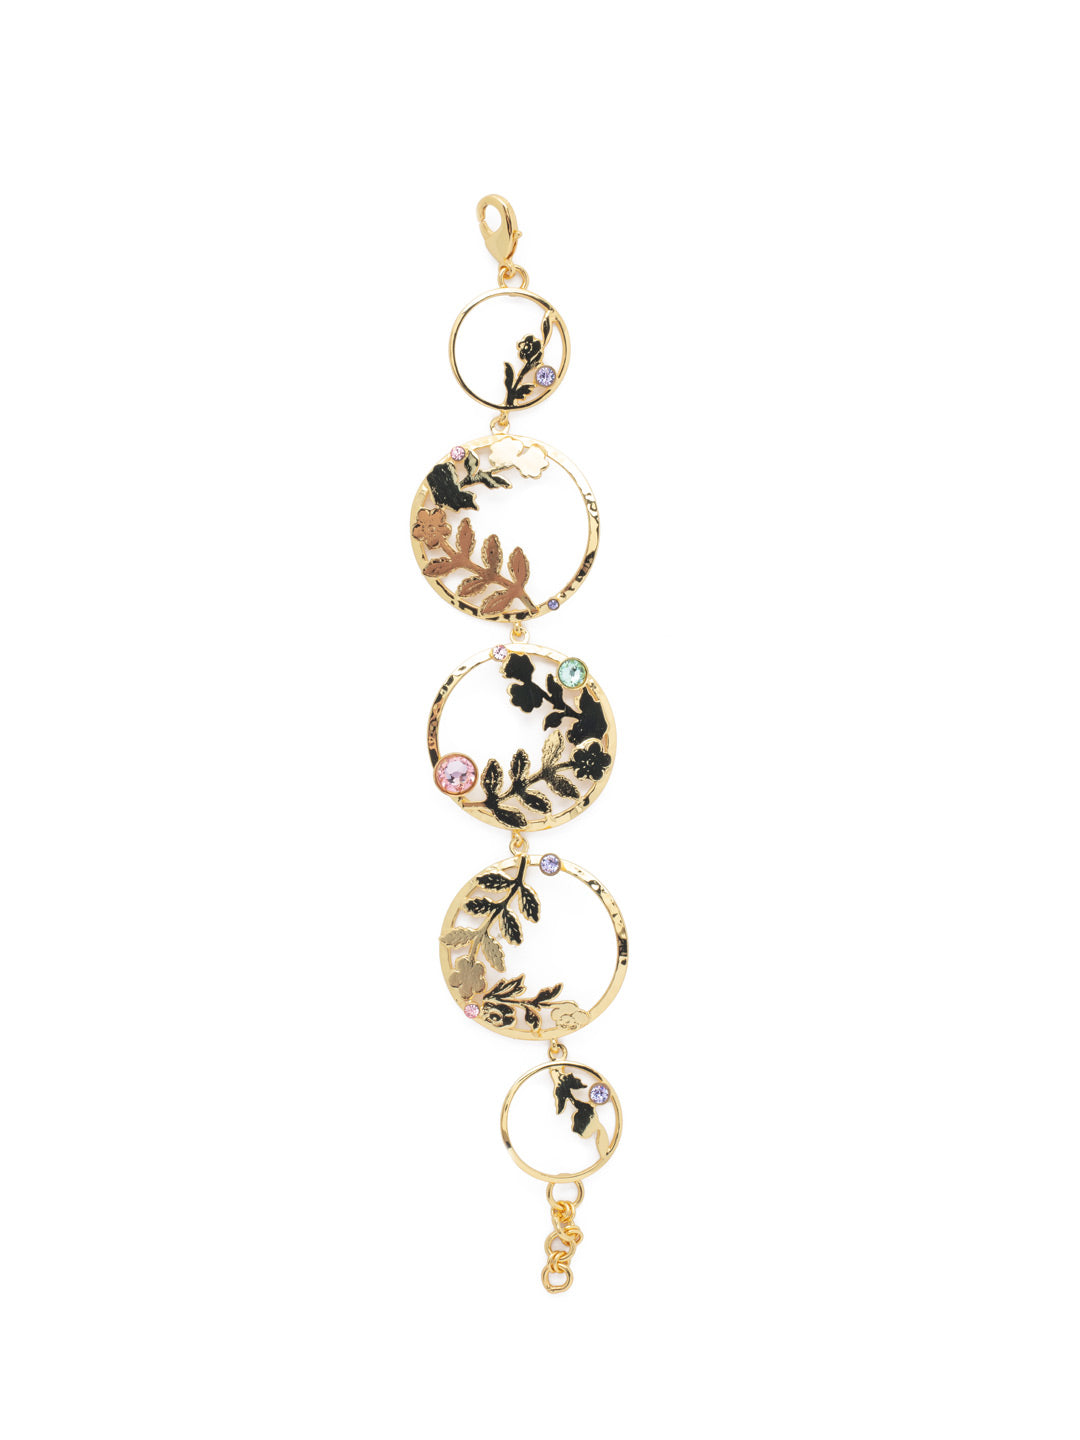 Calypso Statement Bracelet - BEV56BGSPR - <p>Love hoops and metalwork? If you answered "yes," the Calypso Statement Bracelet is a must. Metallic leaf detailing is accented with sparkling crystals. From Sorrelli's Spring Rain collection in our Bright Gold-tone finish.</p>